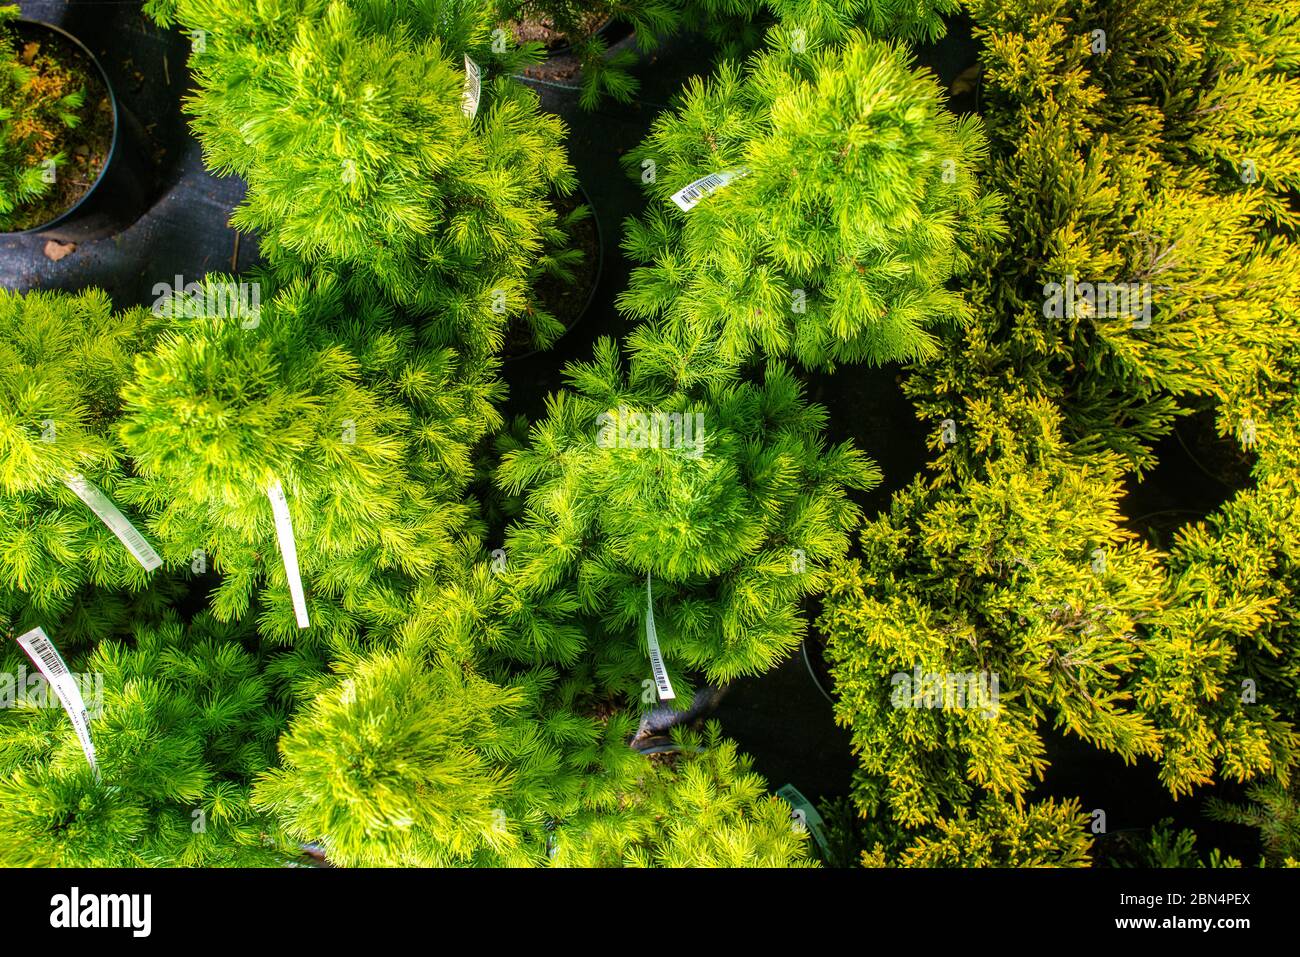 Close Up View From Above Of Variety Of Evergreen Small Trees In Pots At Gardent Center. Stock Photo